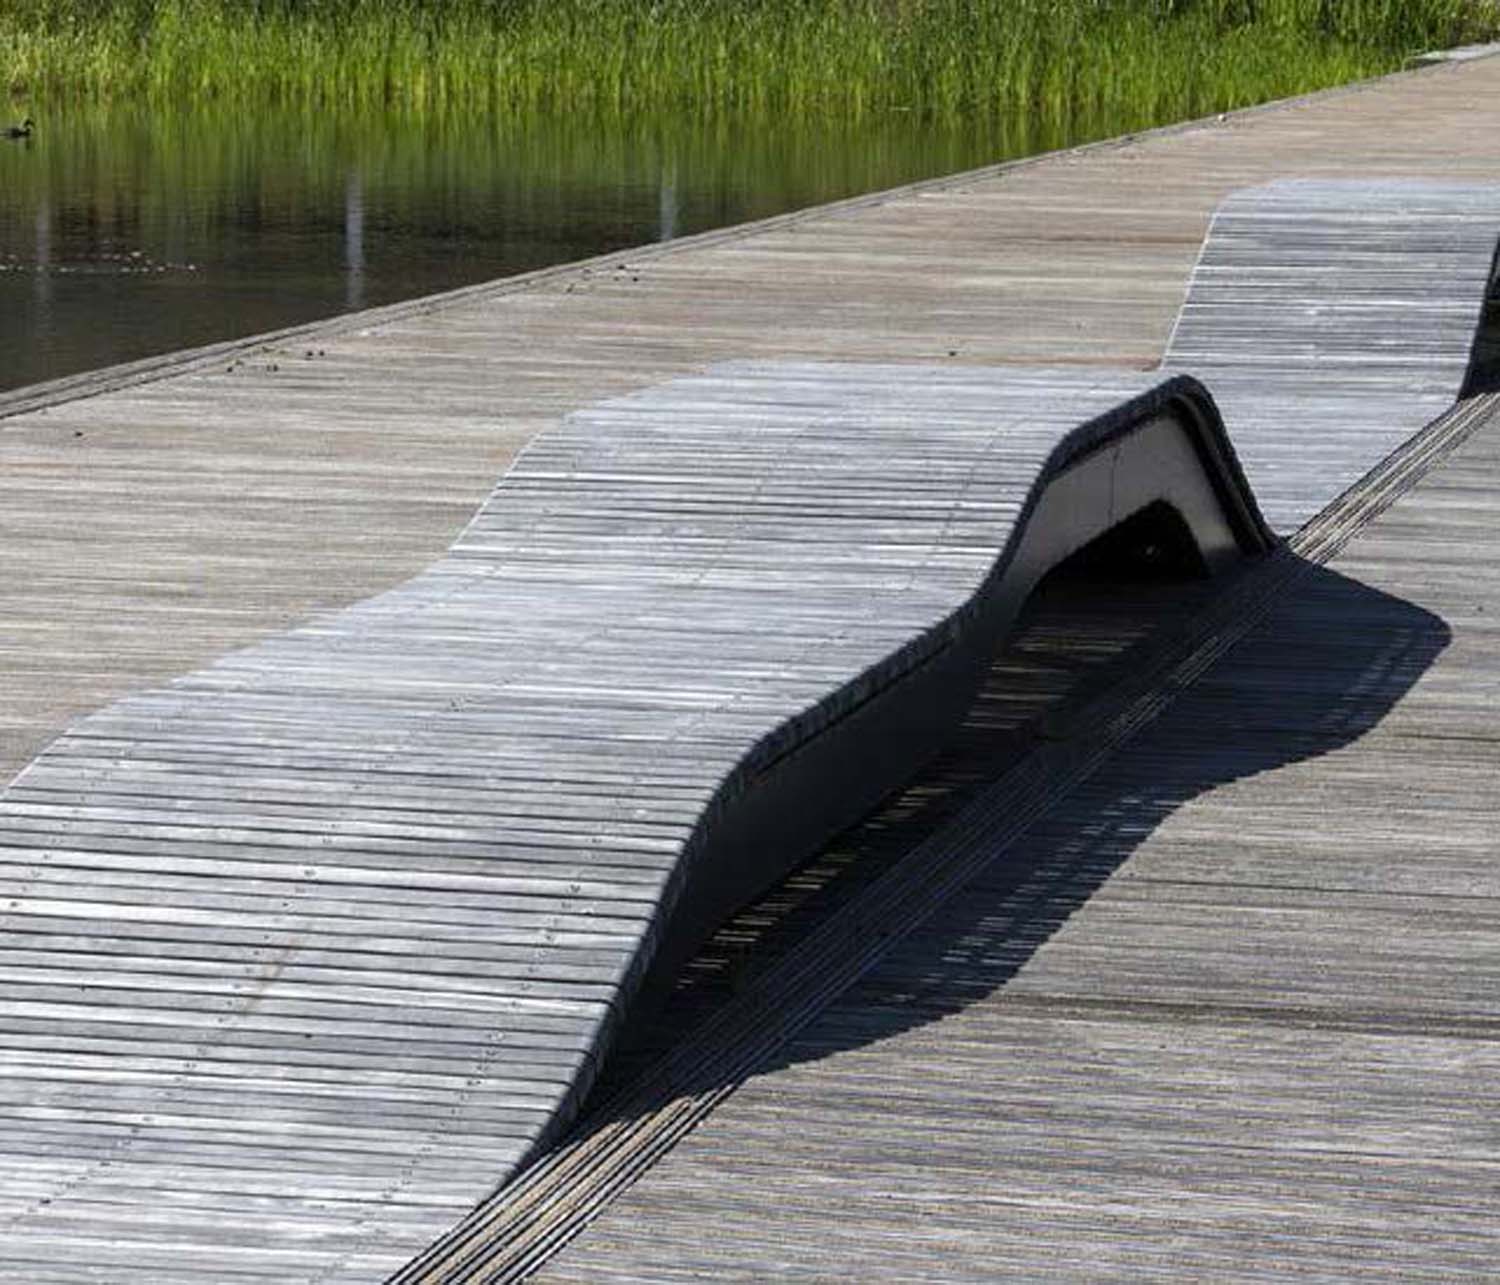 A photograph of a row of weathered wooden seating made from slats that rise in a wave form from the ground